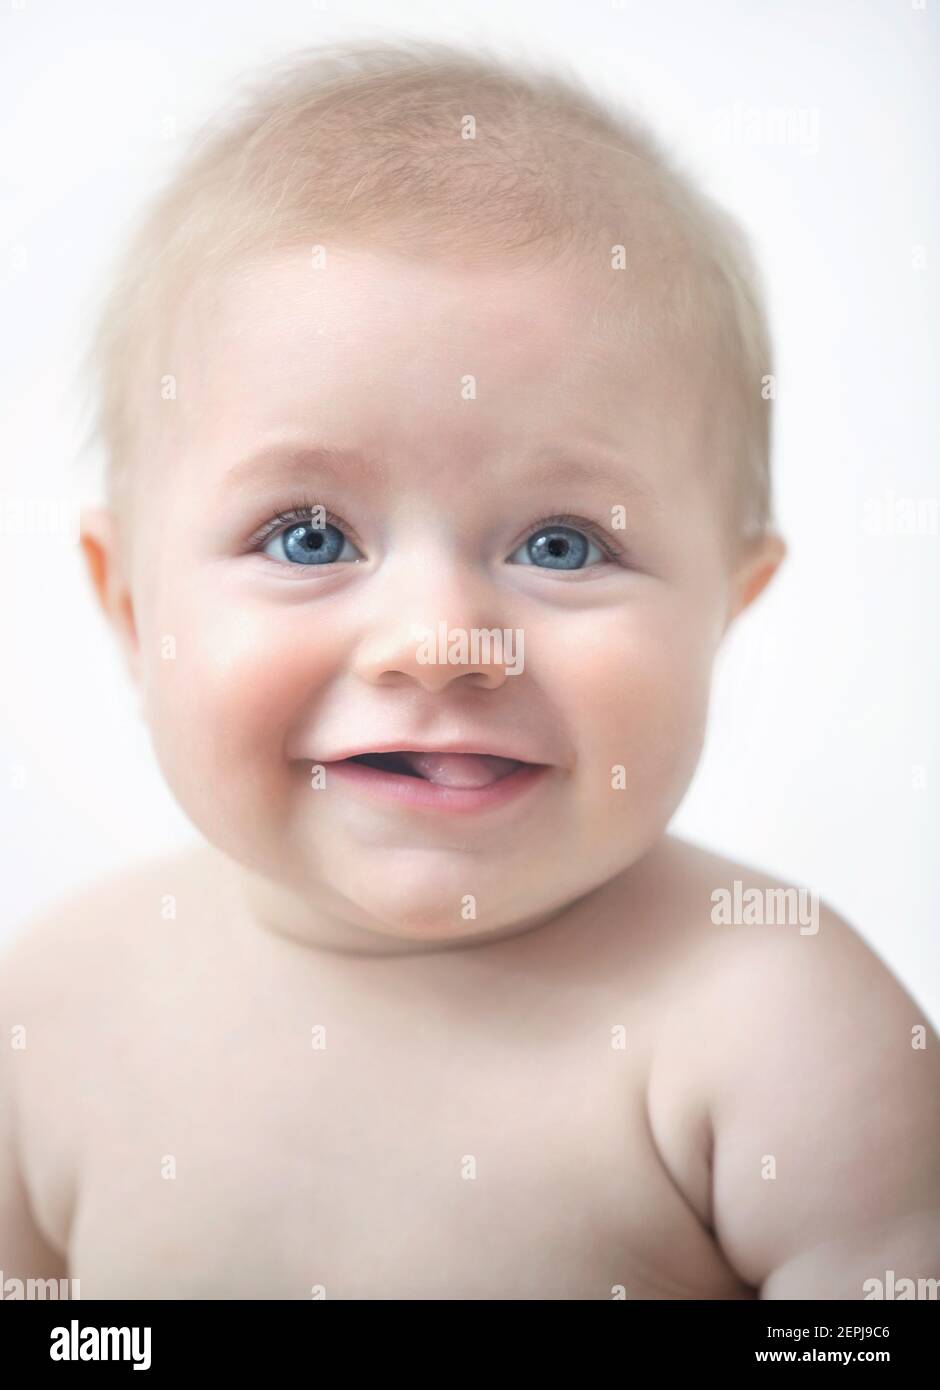 A happy, adorable blond baby with blue eyes. Stock Photo